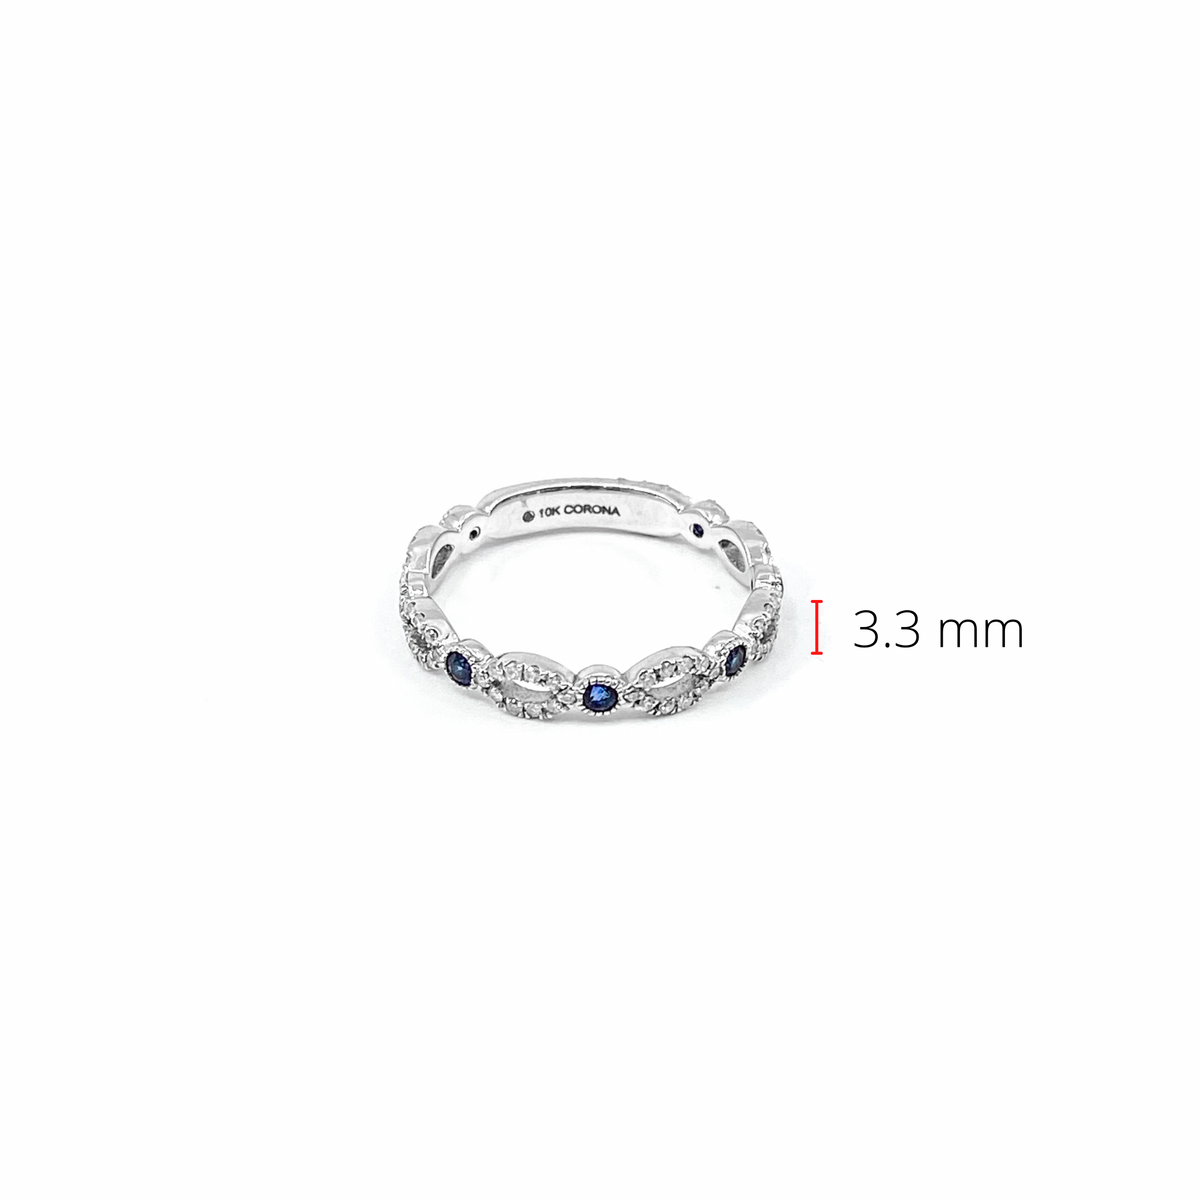 10K White Gold 0.28cttw Genuine Sapphire and 0.18cttw Diamond Ring, size 6.5